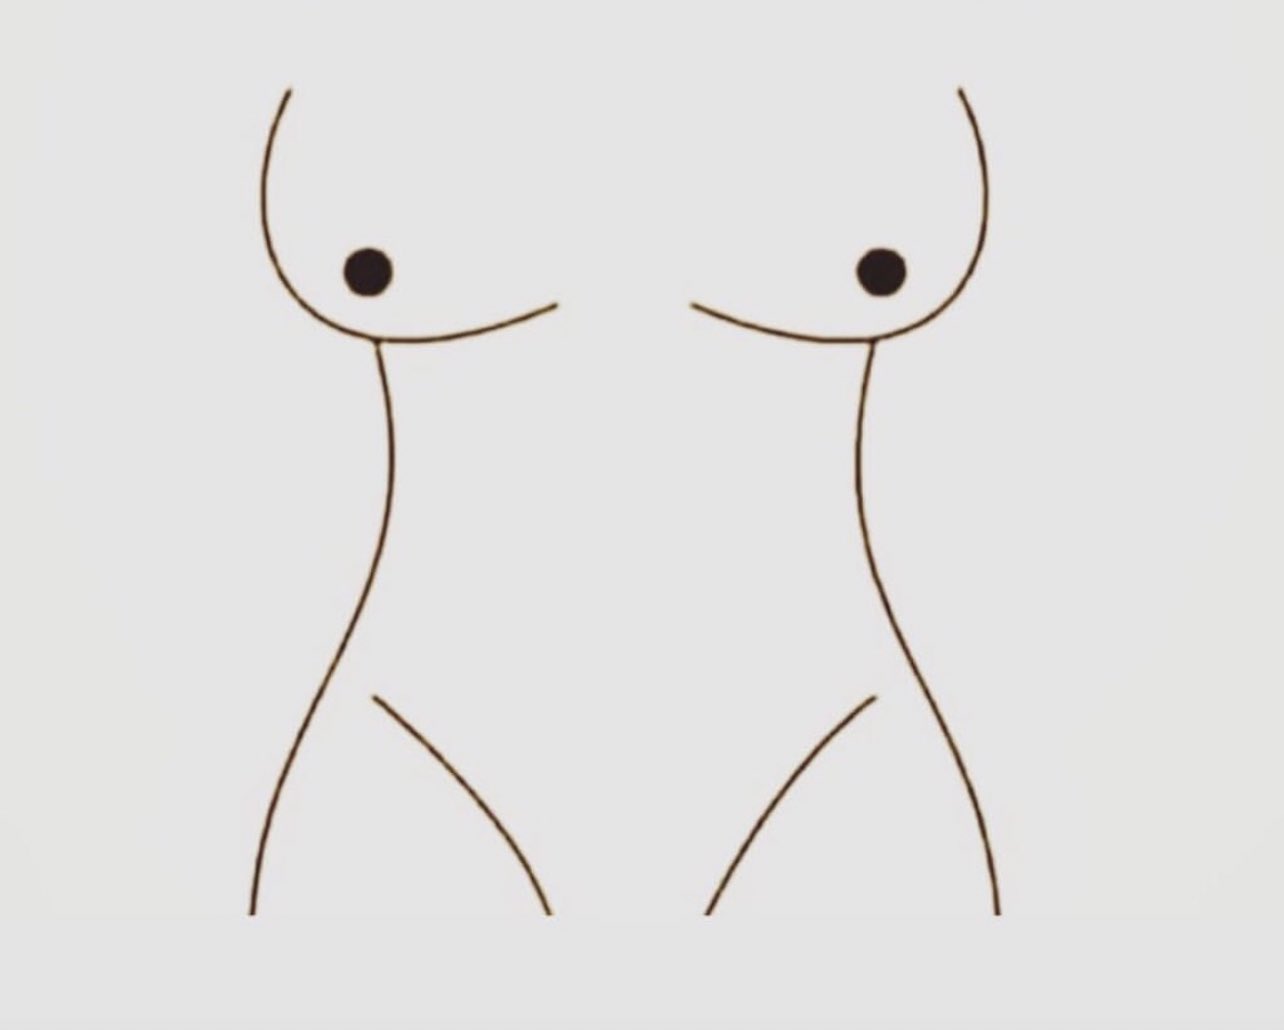 Anya on X: If you don't see 2 stick figures dancing you got